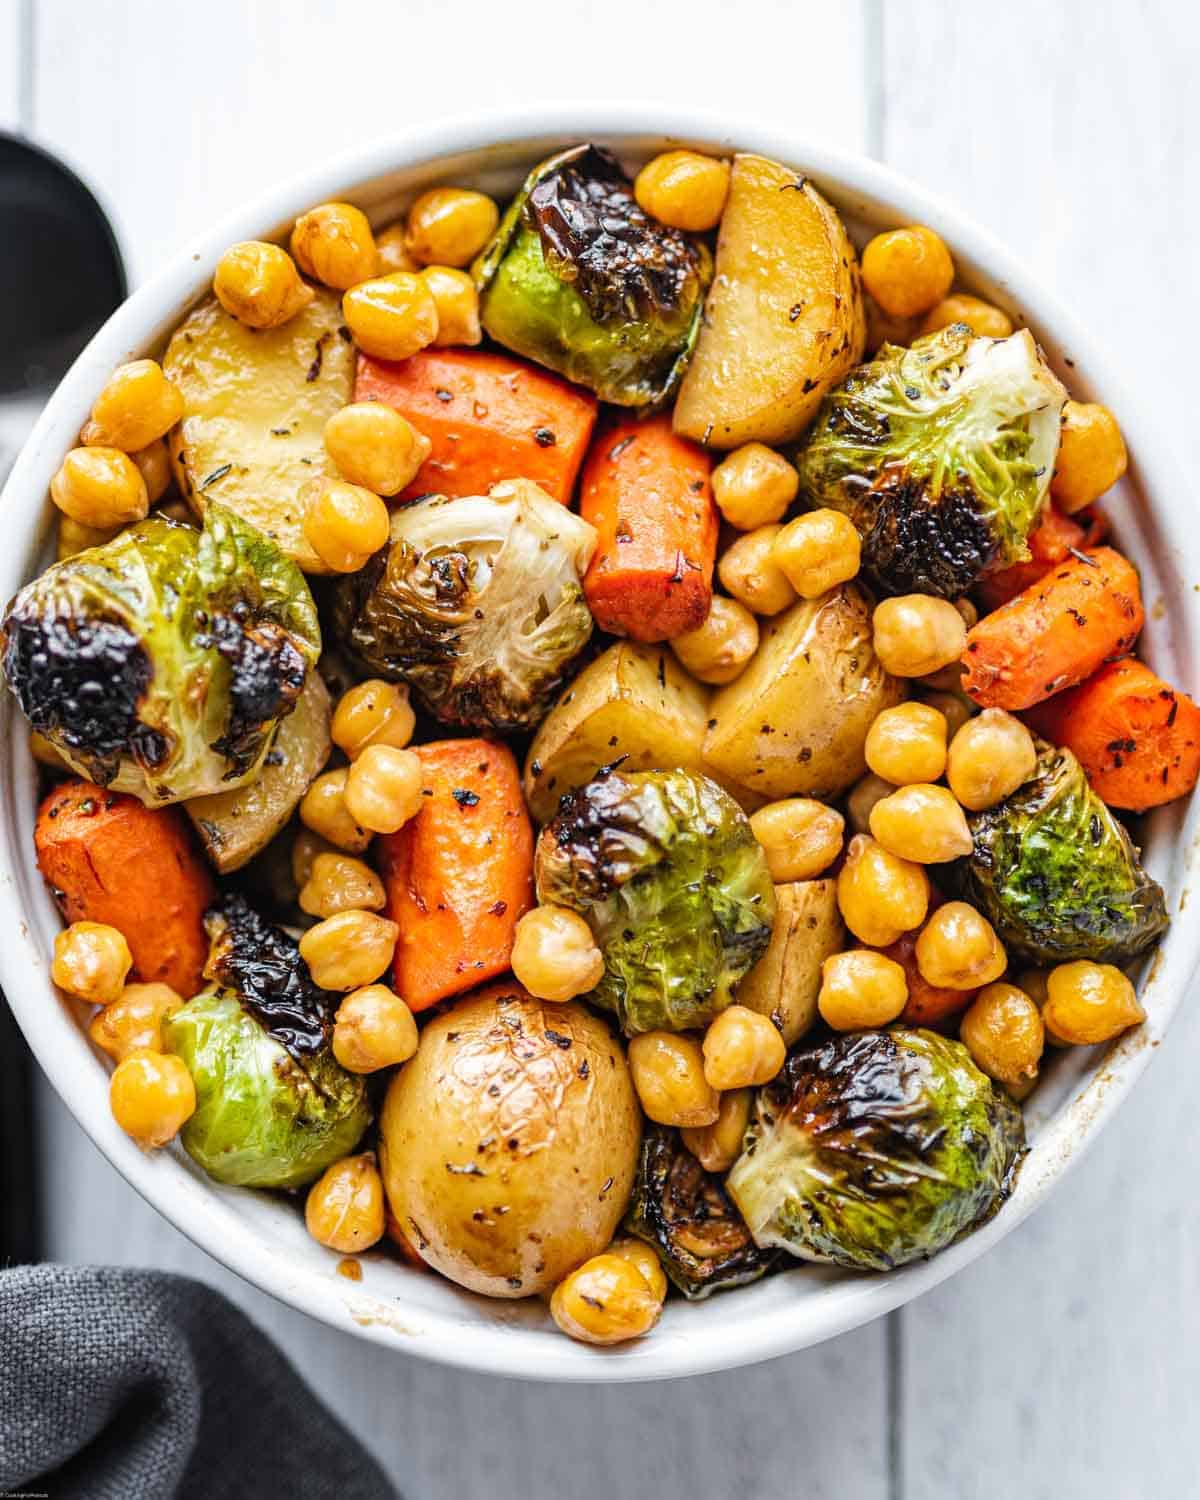 Easy vegan iron recipe with roasted carrots, potatoes, Brussels sprouts, and chickpeas in a white bowl for serving.